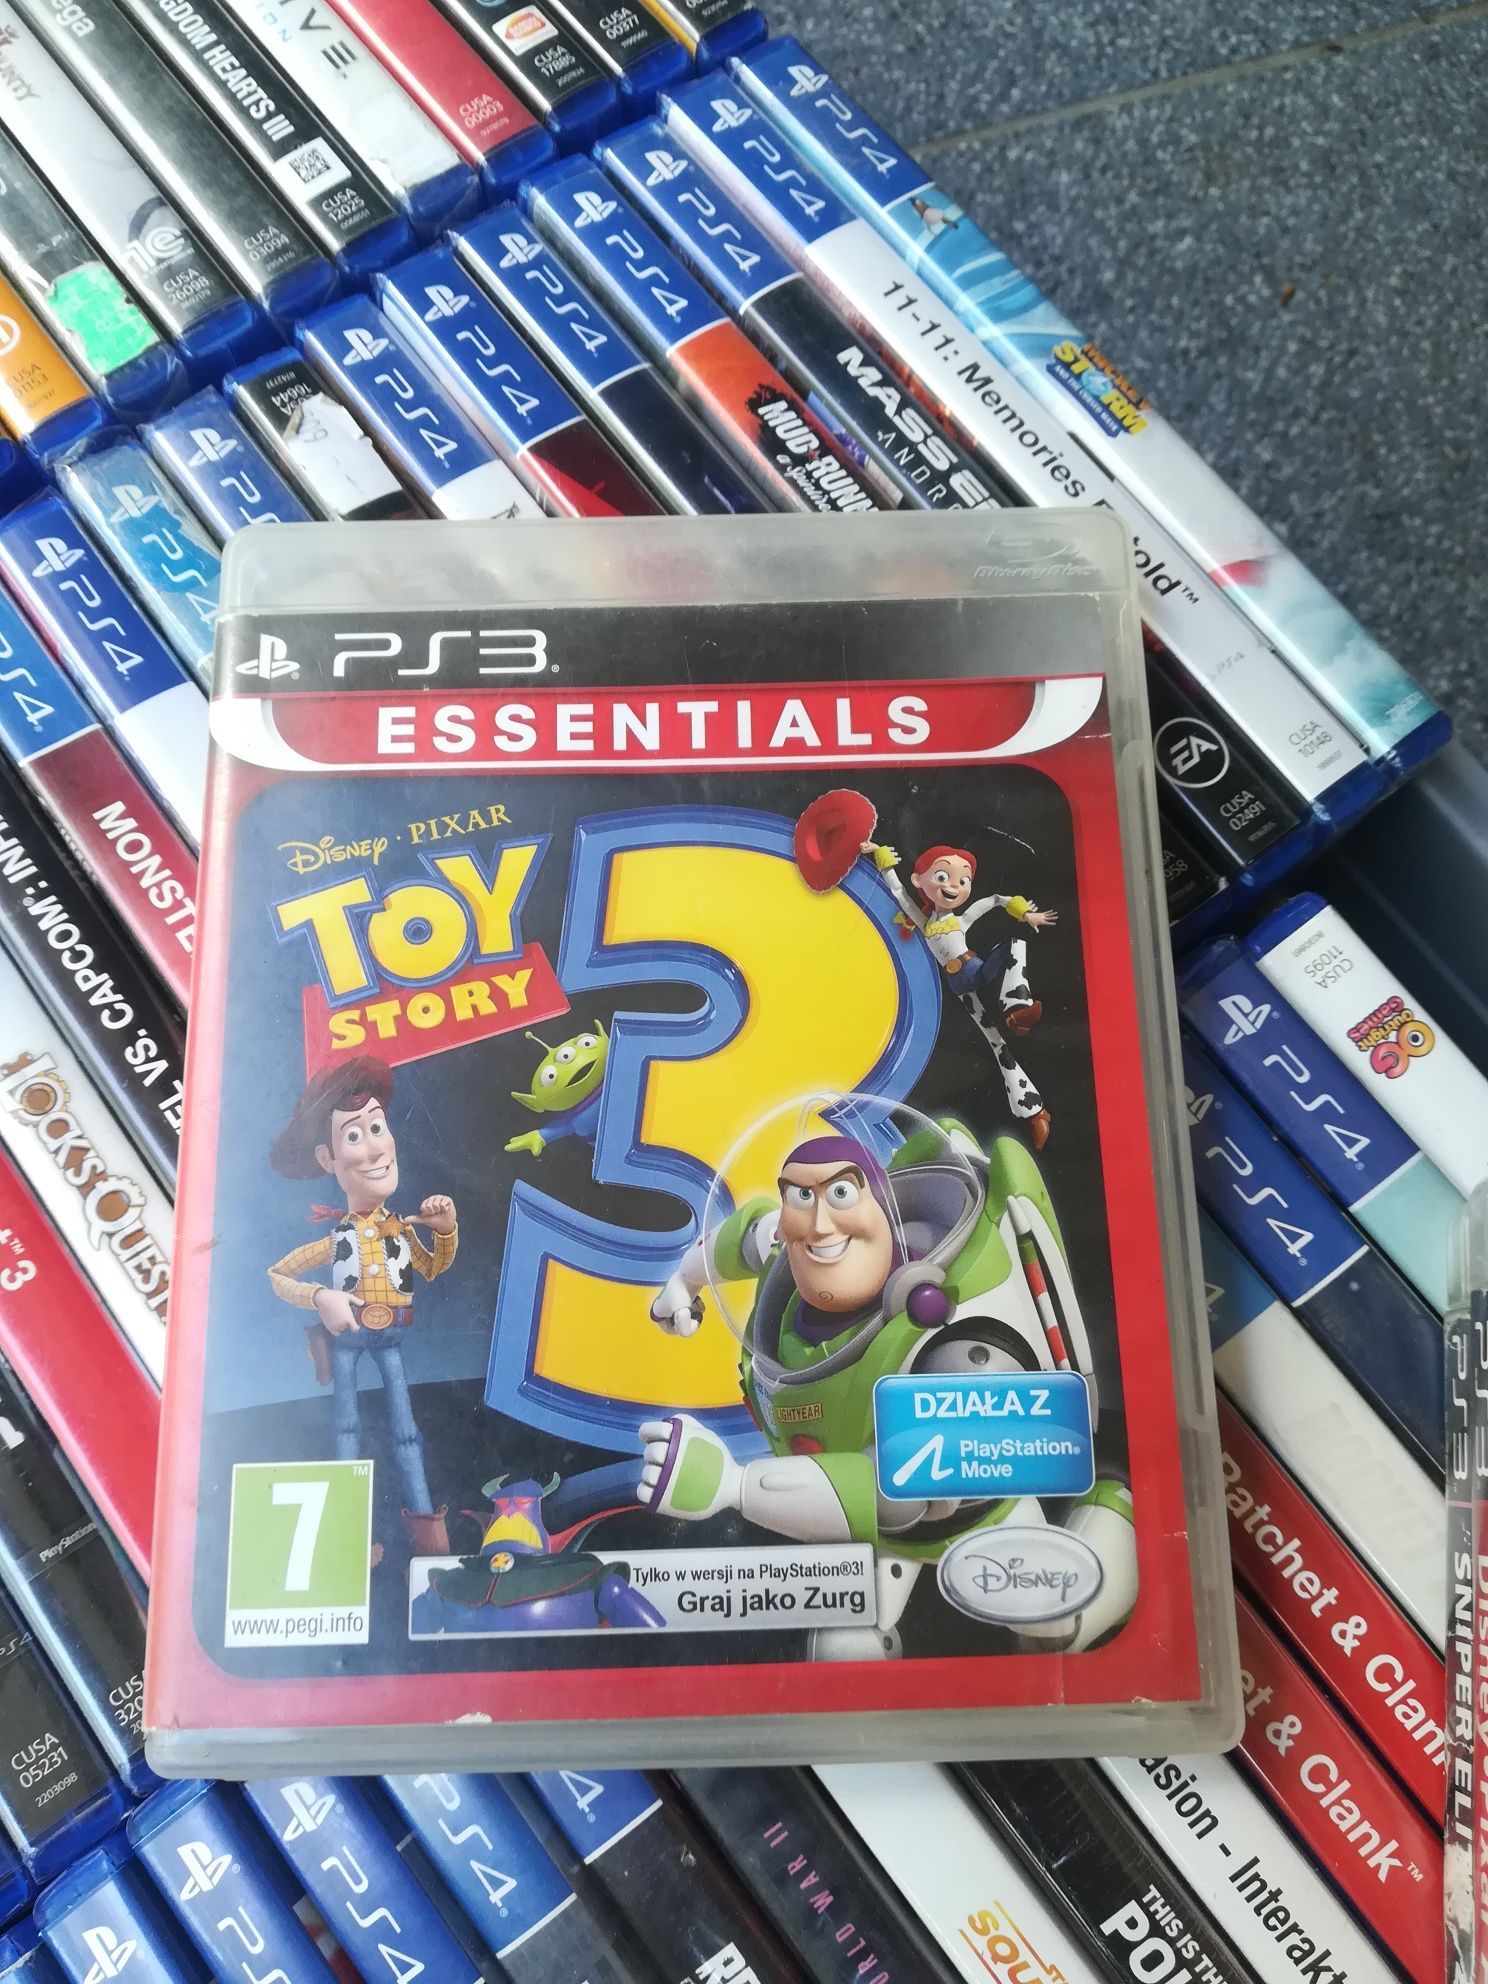 Toy story 3 ps3 PlayStation 3